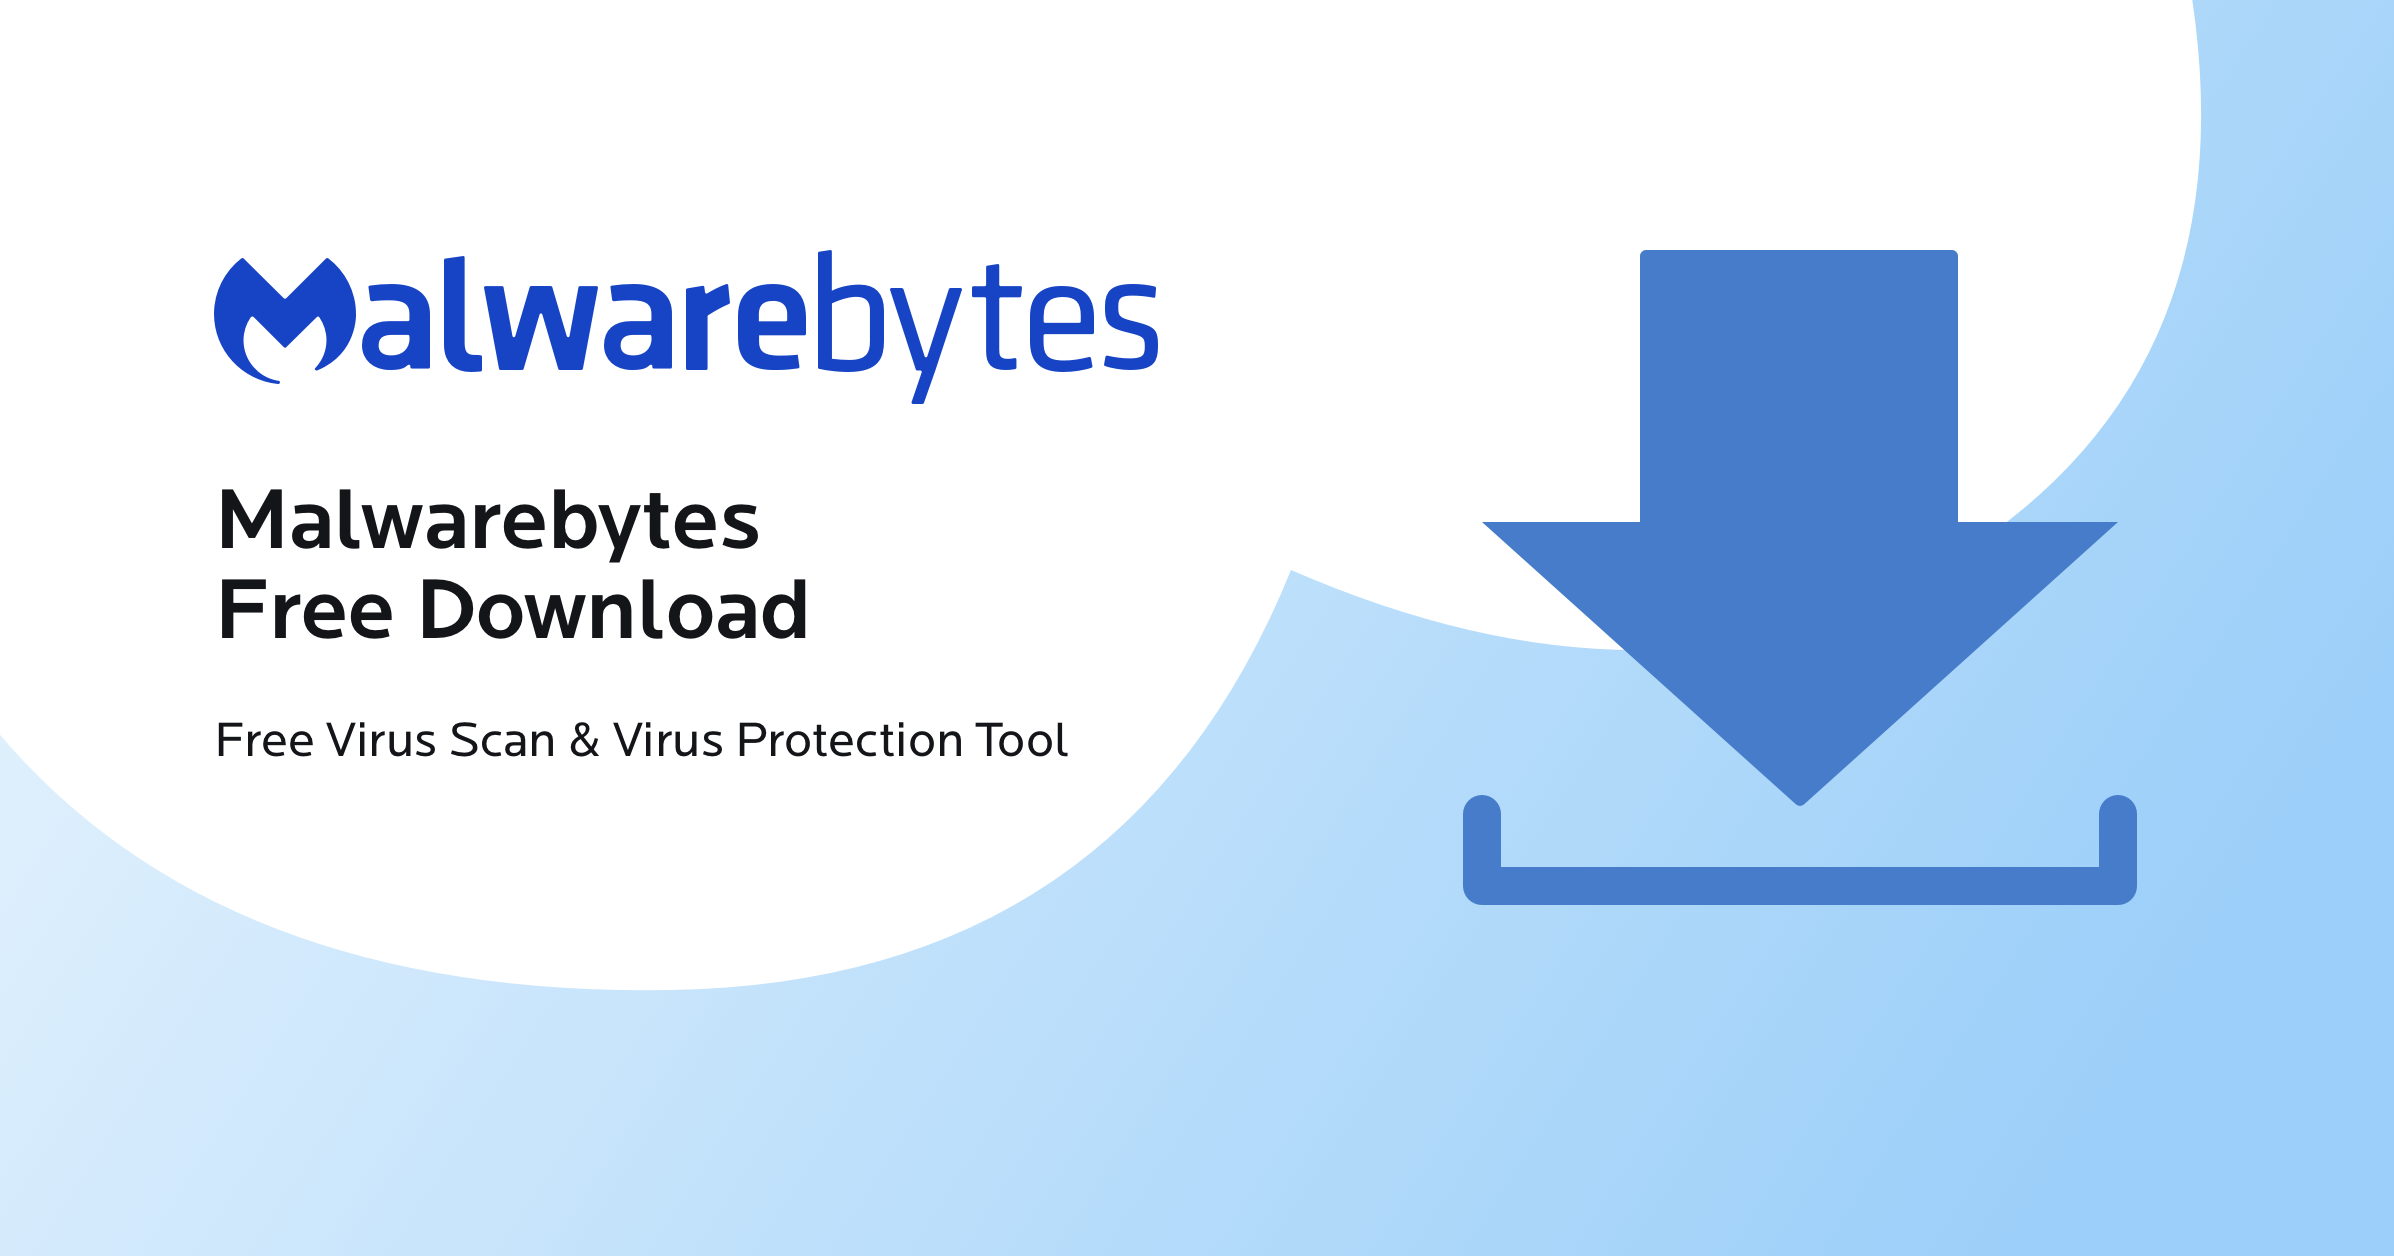 Base64.exe Removal Tool: A software designed to remove Base64.exe utility from Windows systems.
Malwarebytes Anti-Malware: A powerful alternative to the Base64.exe utility for detecting and removing malware.